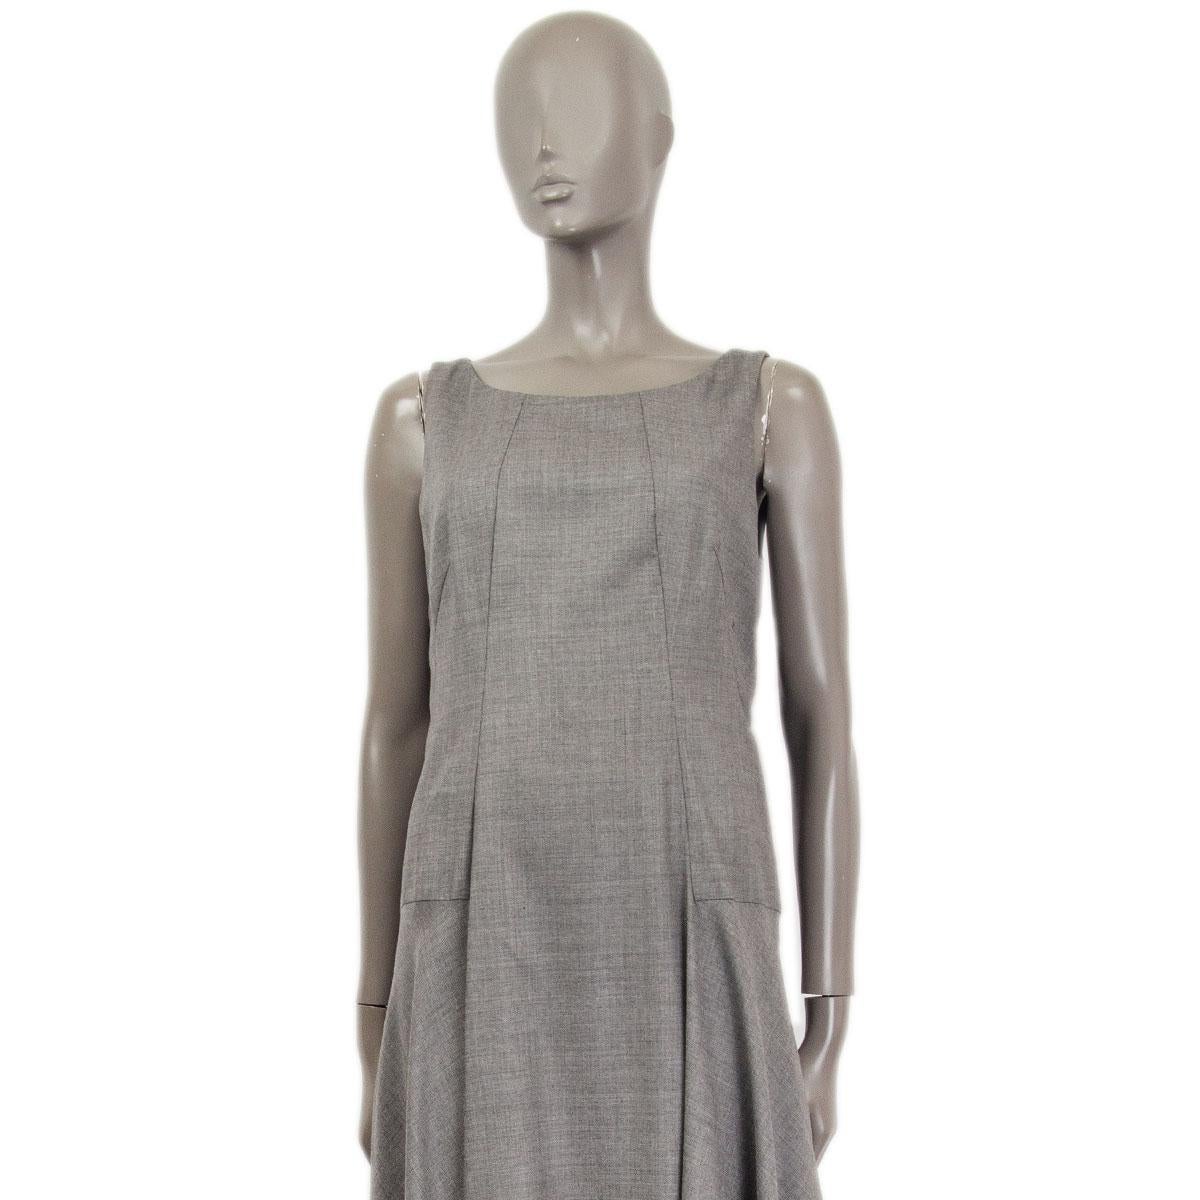 100% authentic Akris sleeveless midi dress in gray wool (100%) with with sharkbite hemline. Uniquely paneled with delicate tailoring. Closes on the back with a concealed zipper.  Lined in gray viscose (100%). Has been worn and is in excellent